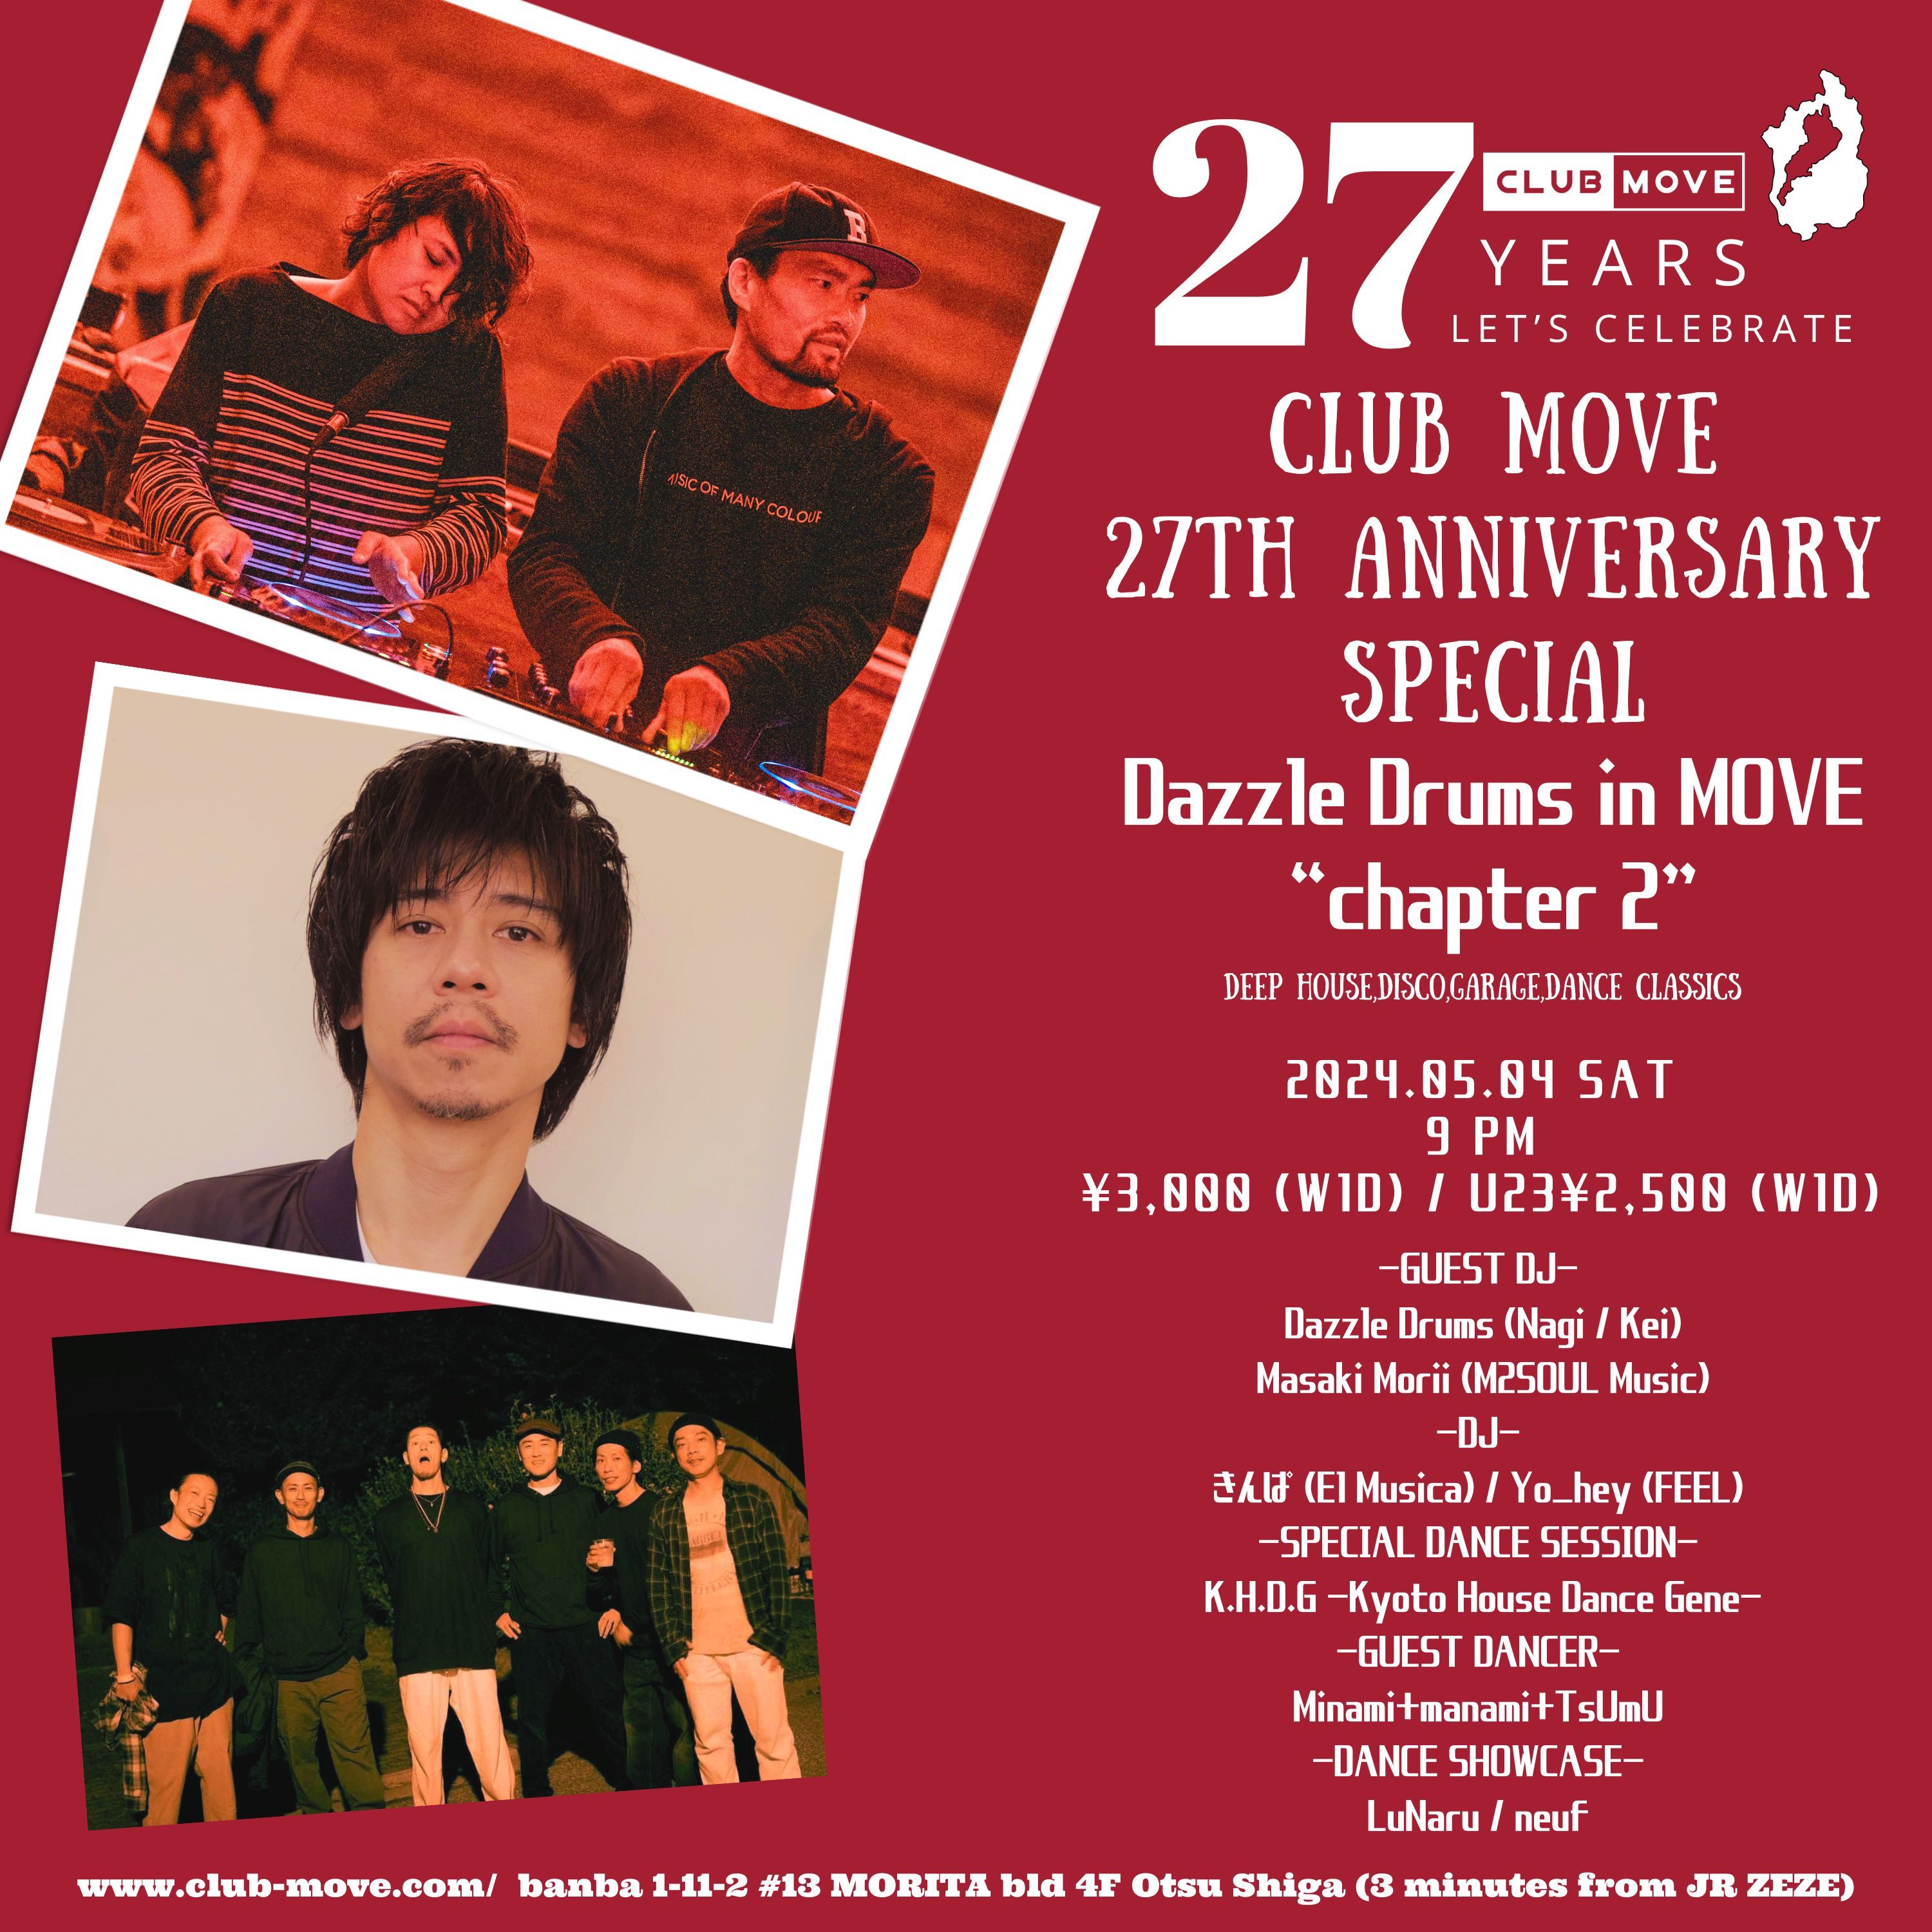 ～CLUB MOVE 27th Anniversary Special～ Dazzle Drums in MOVE -chapter 2-